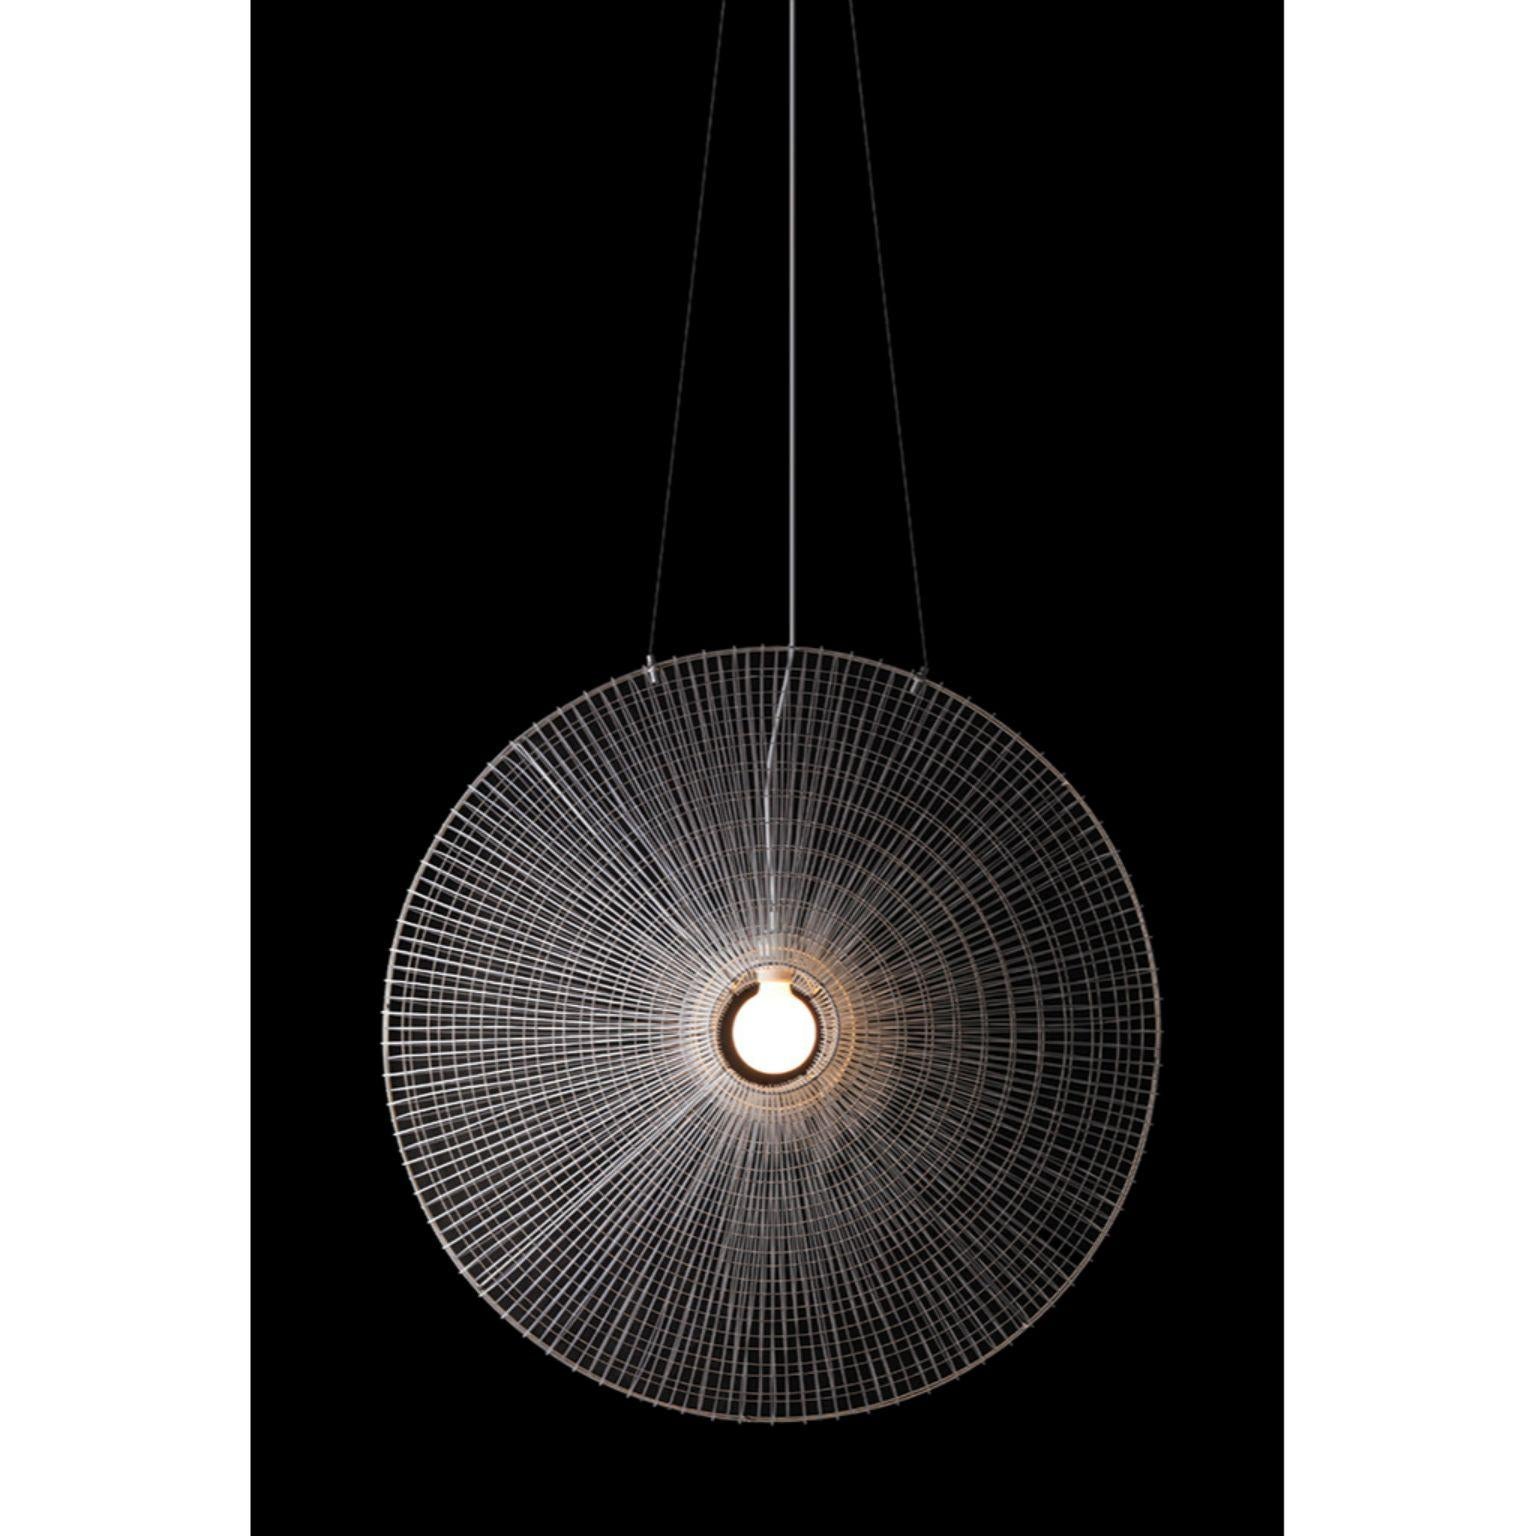 Halo pendant lamp, Kenneth Cobonpue.
Materials: Nylon, powder-coated steel.
Dimensions: D 30 x W 90 x H 150 cm.

Kenneth Cobonpue is a multi-awarded furniture designer and manufacturer from Cebu, Philippines. His passage to design began in 1987,